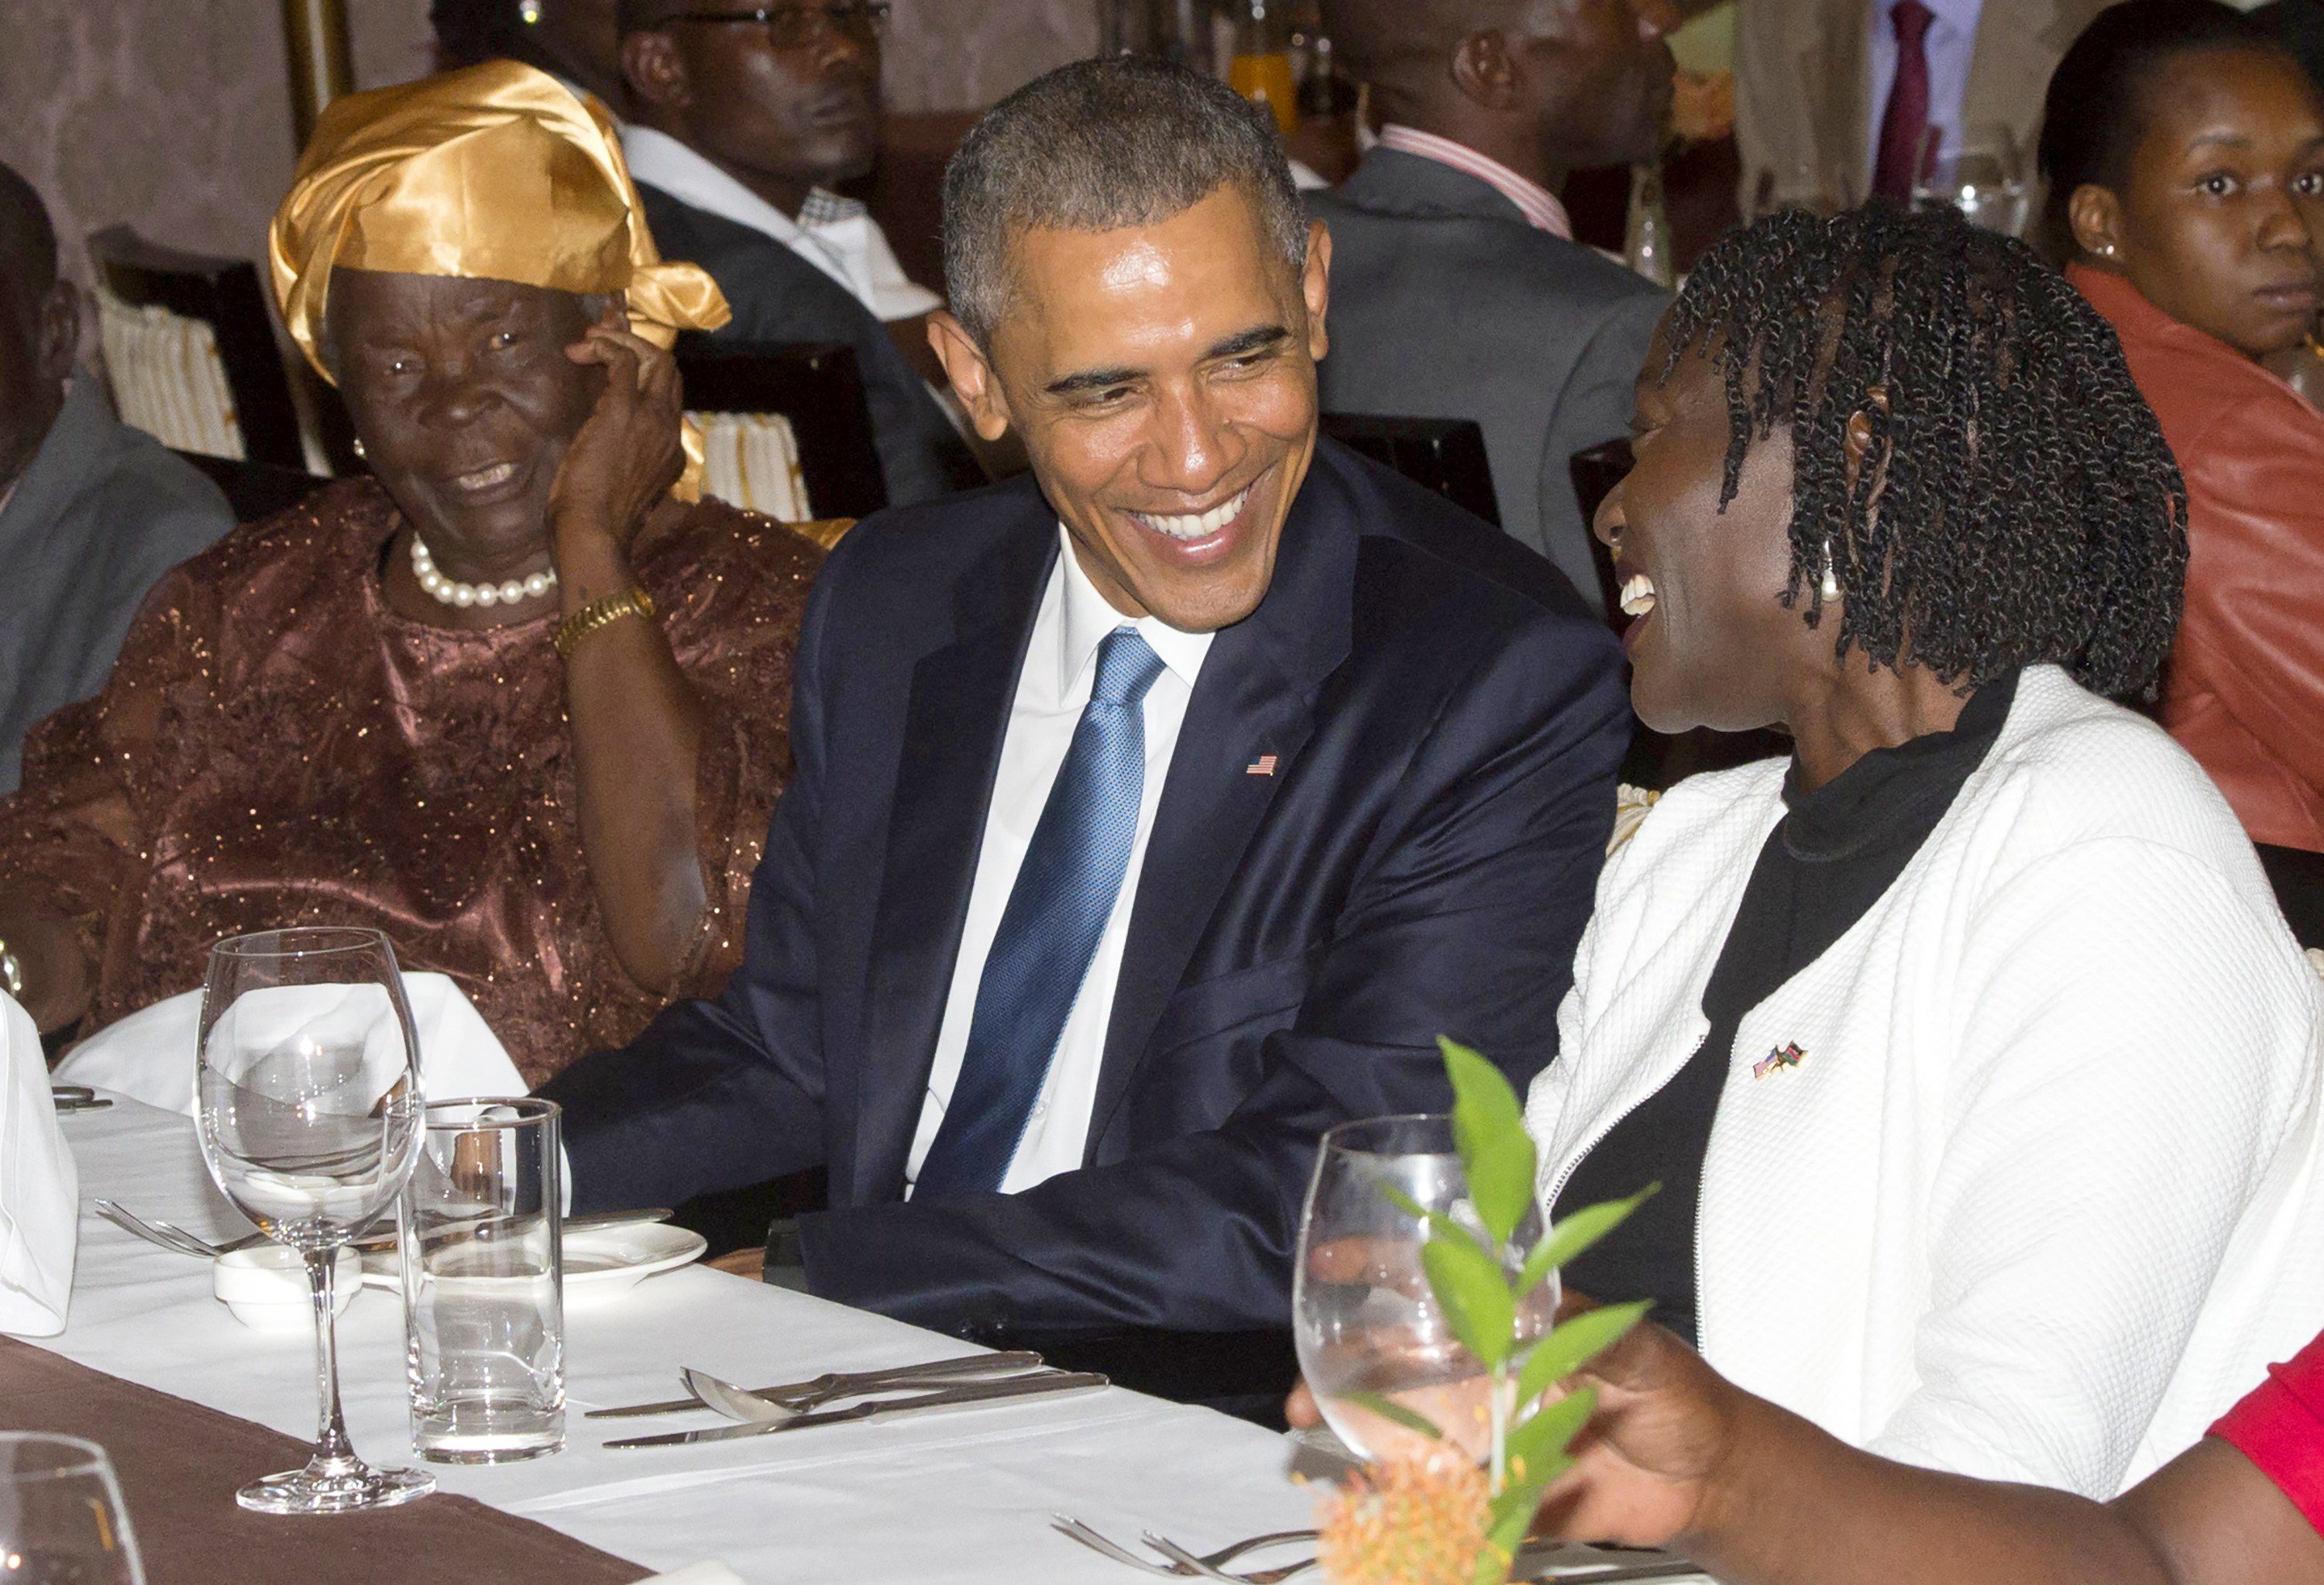 US President Barack Obama sits alongside his step-grandmother, Mama Sarah, left, and half-sister Auma Obama, right, during a gathering of family at his hotel in Nairobi on July 24, 2015. (Saul Loeb—AFP/Getty Images)